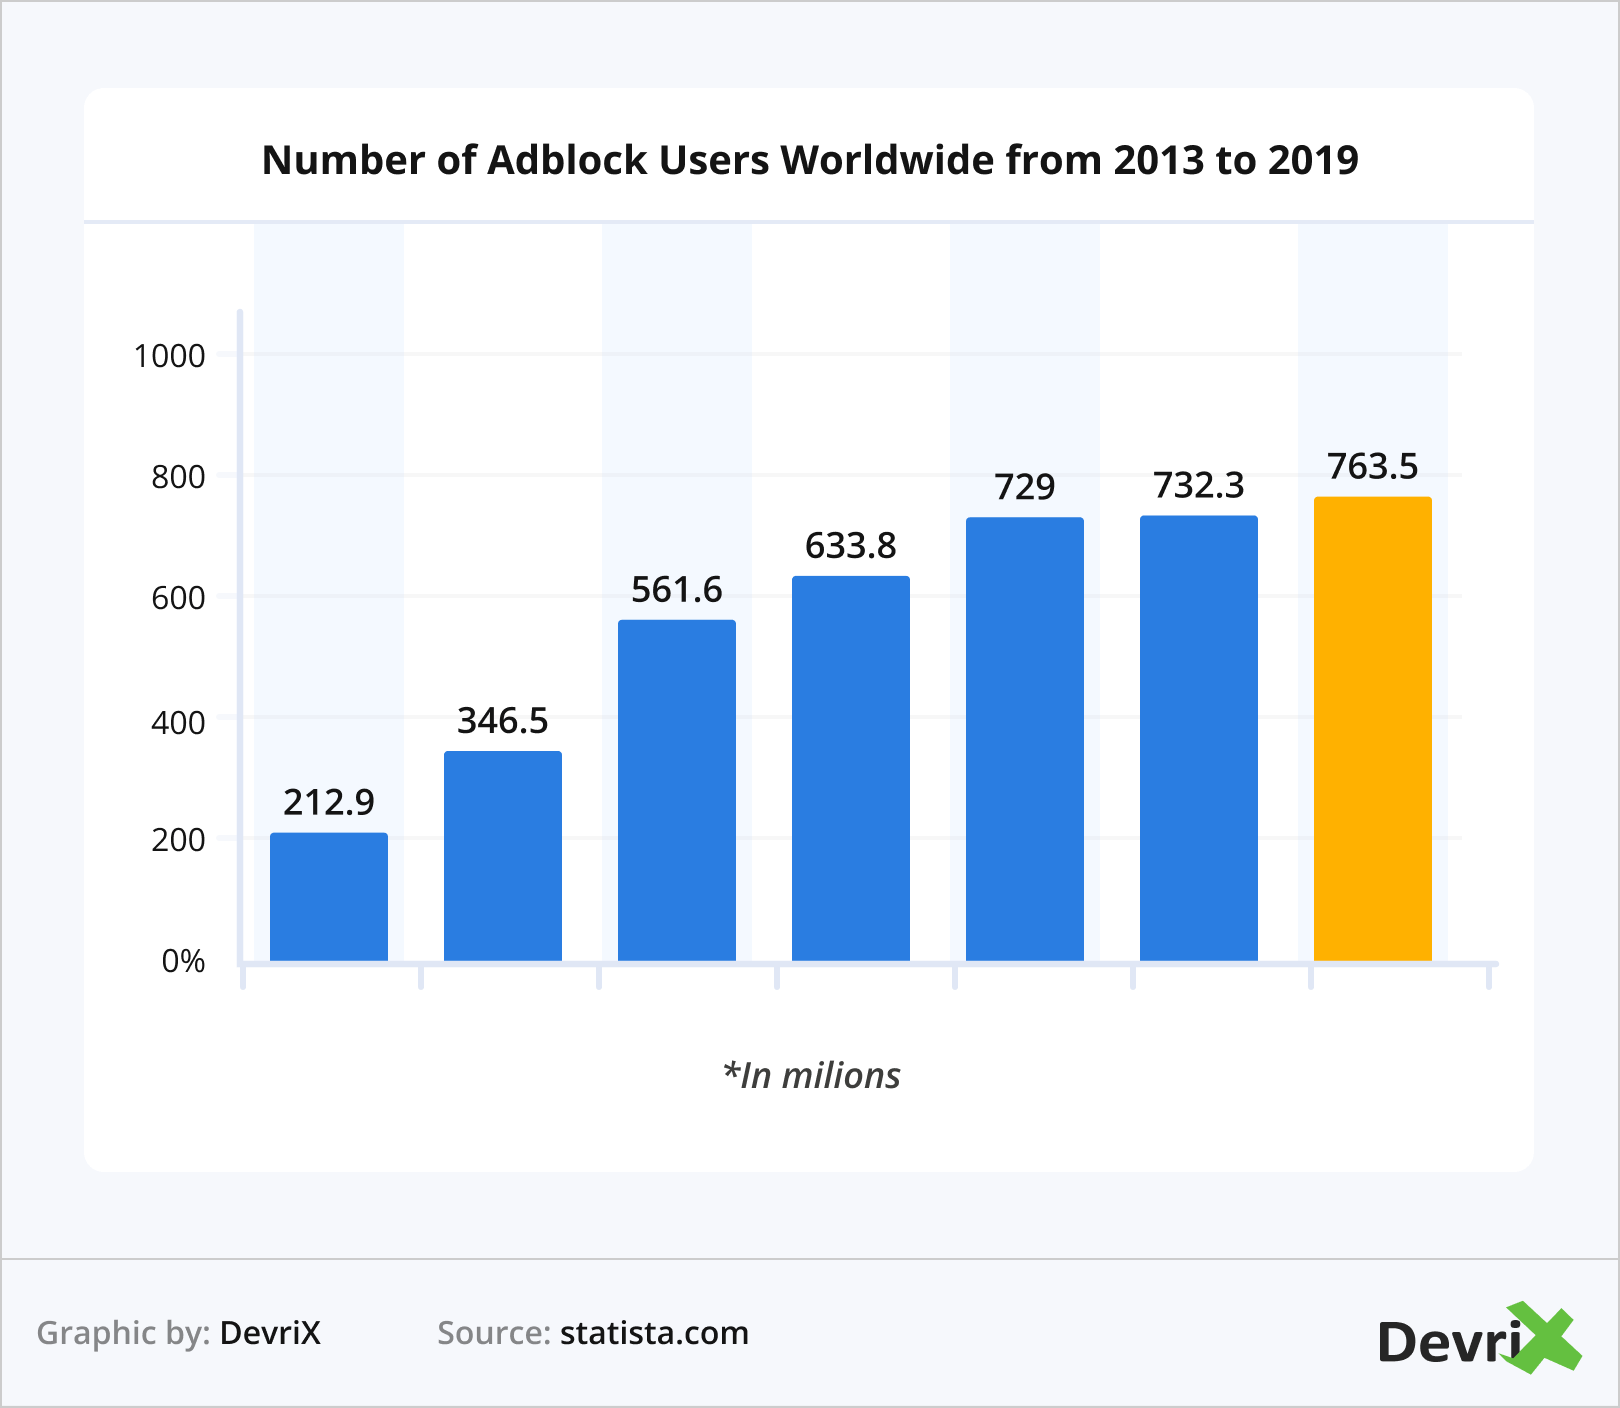 Number of adblock users worldwide from 2013 to 2019